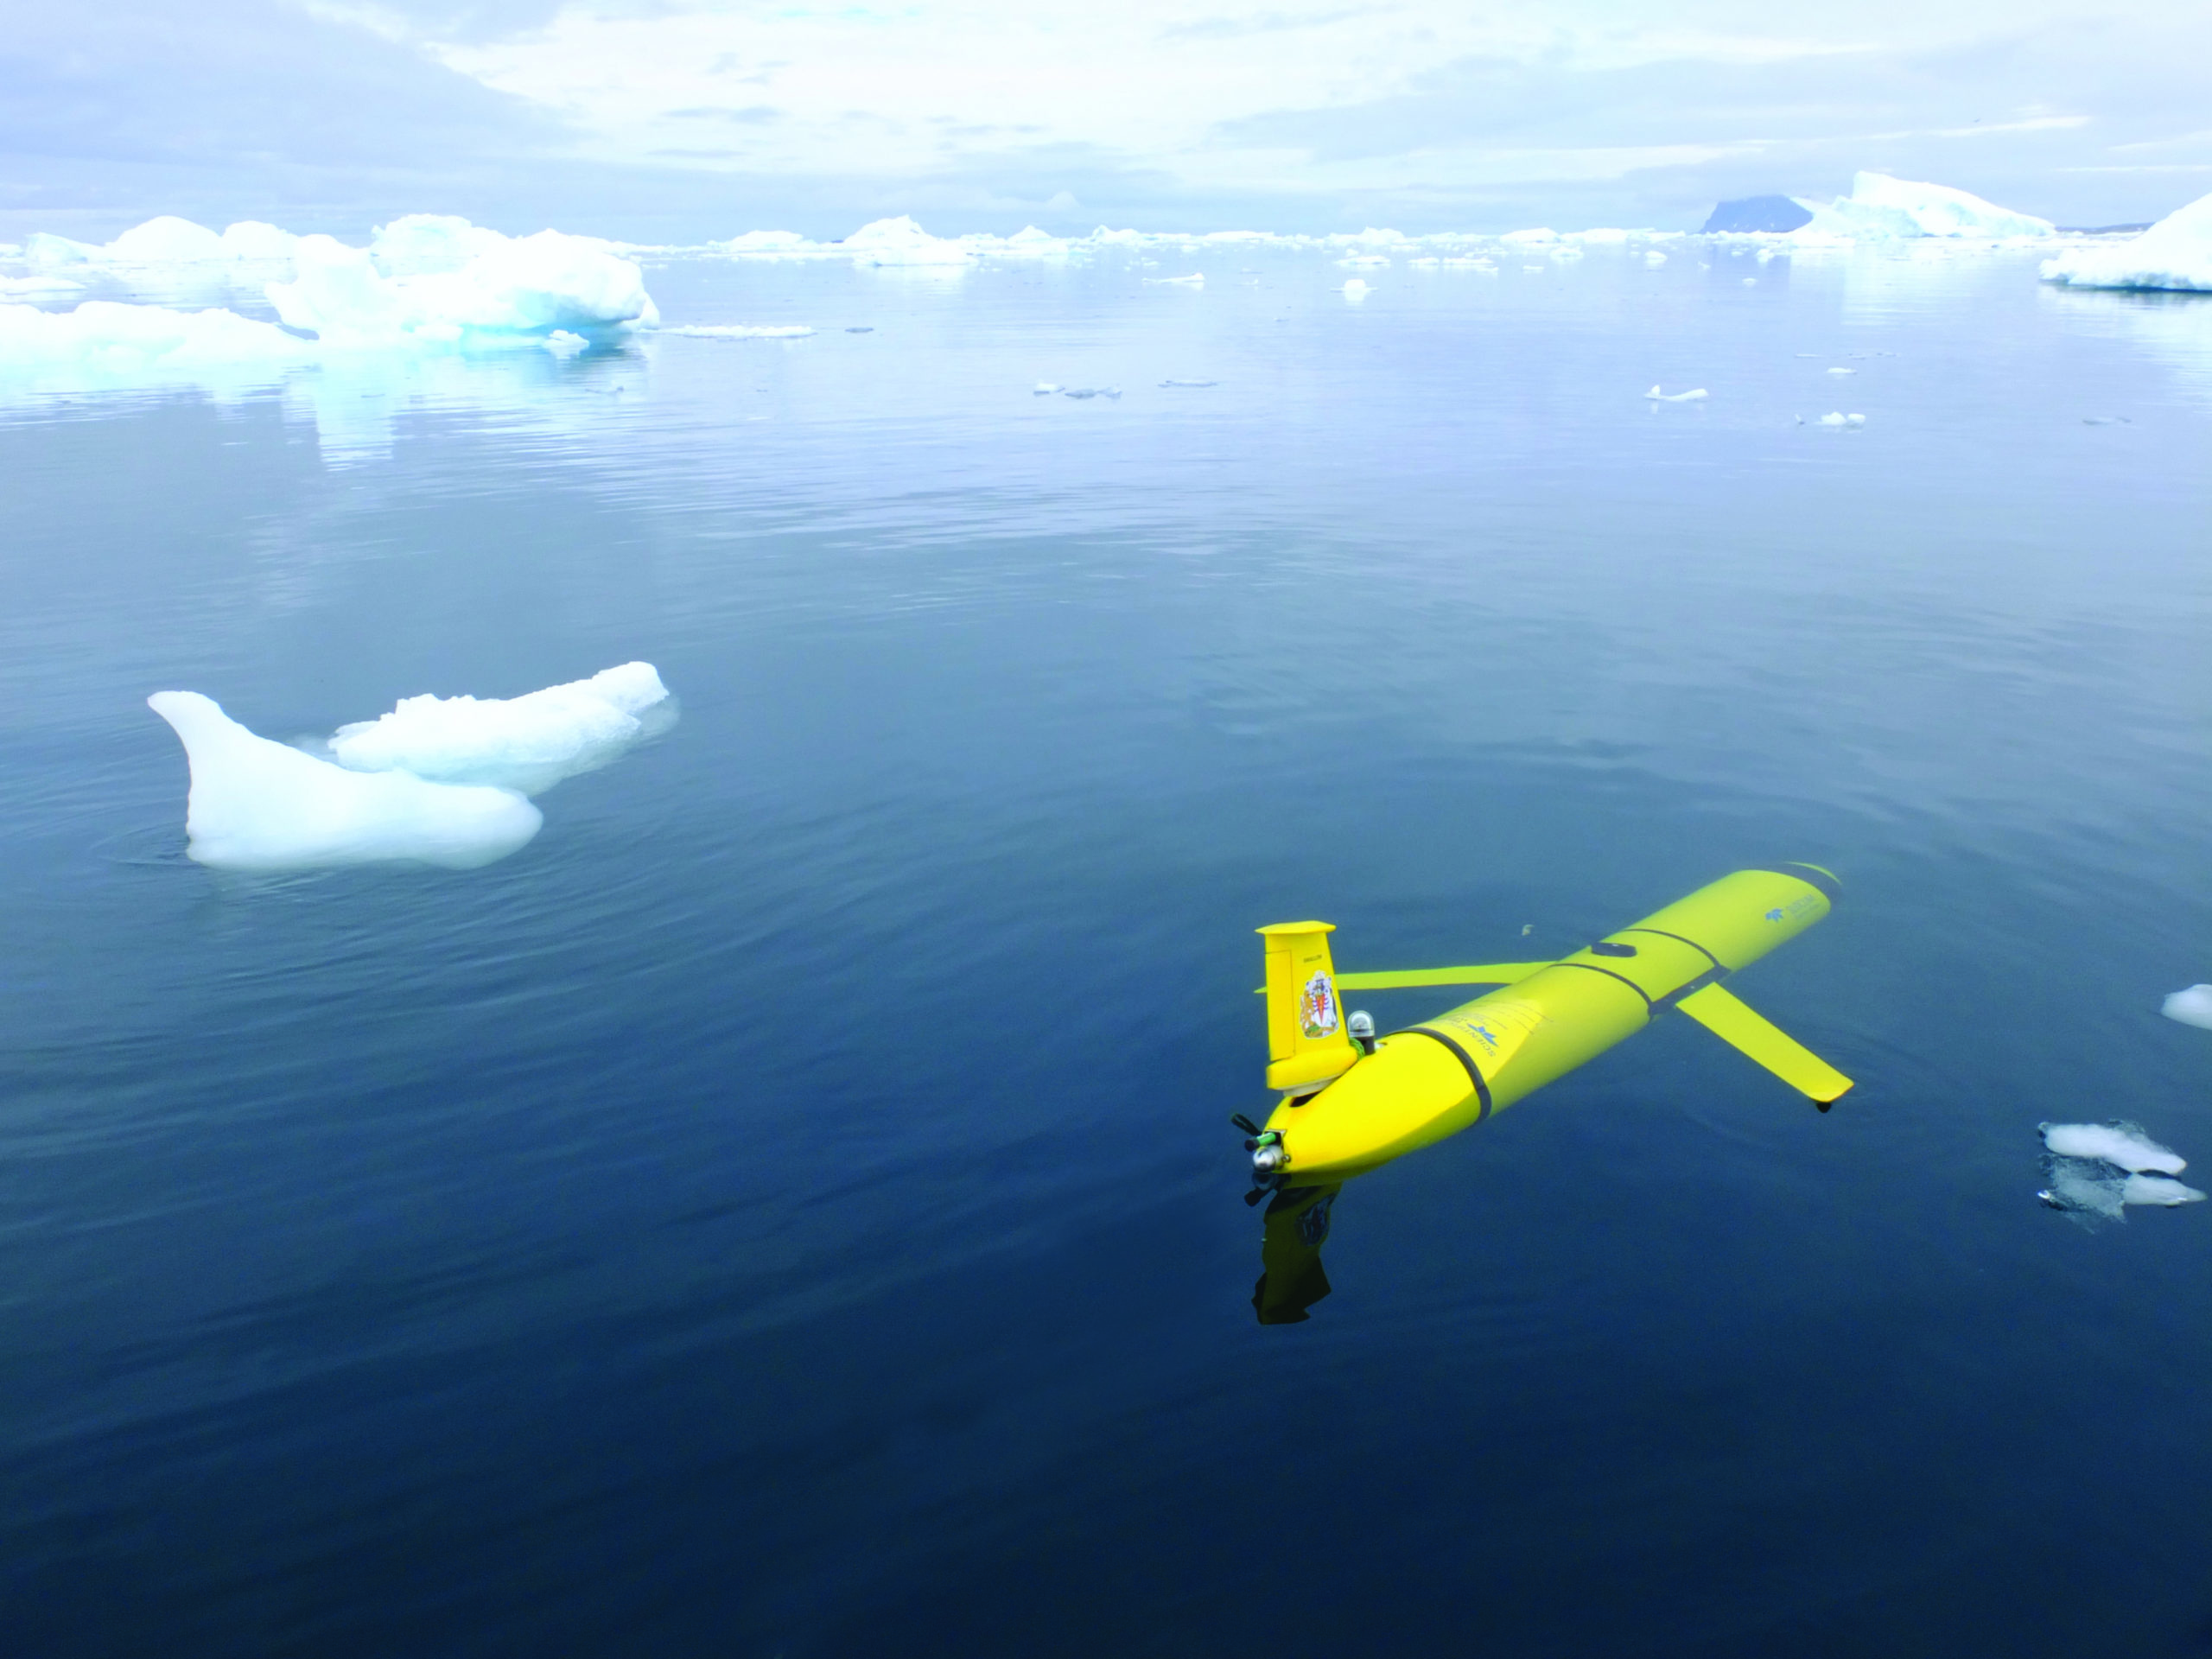 Ocean glider at sea surface surrounded by ice